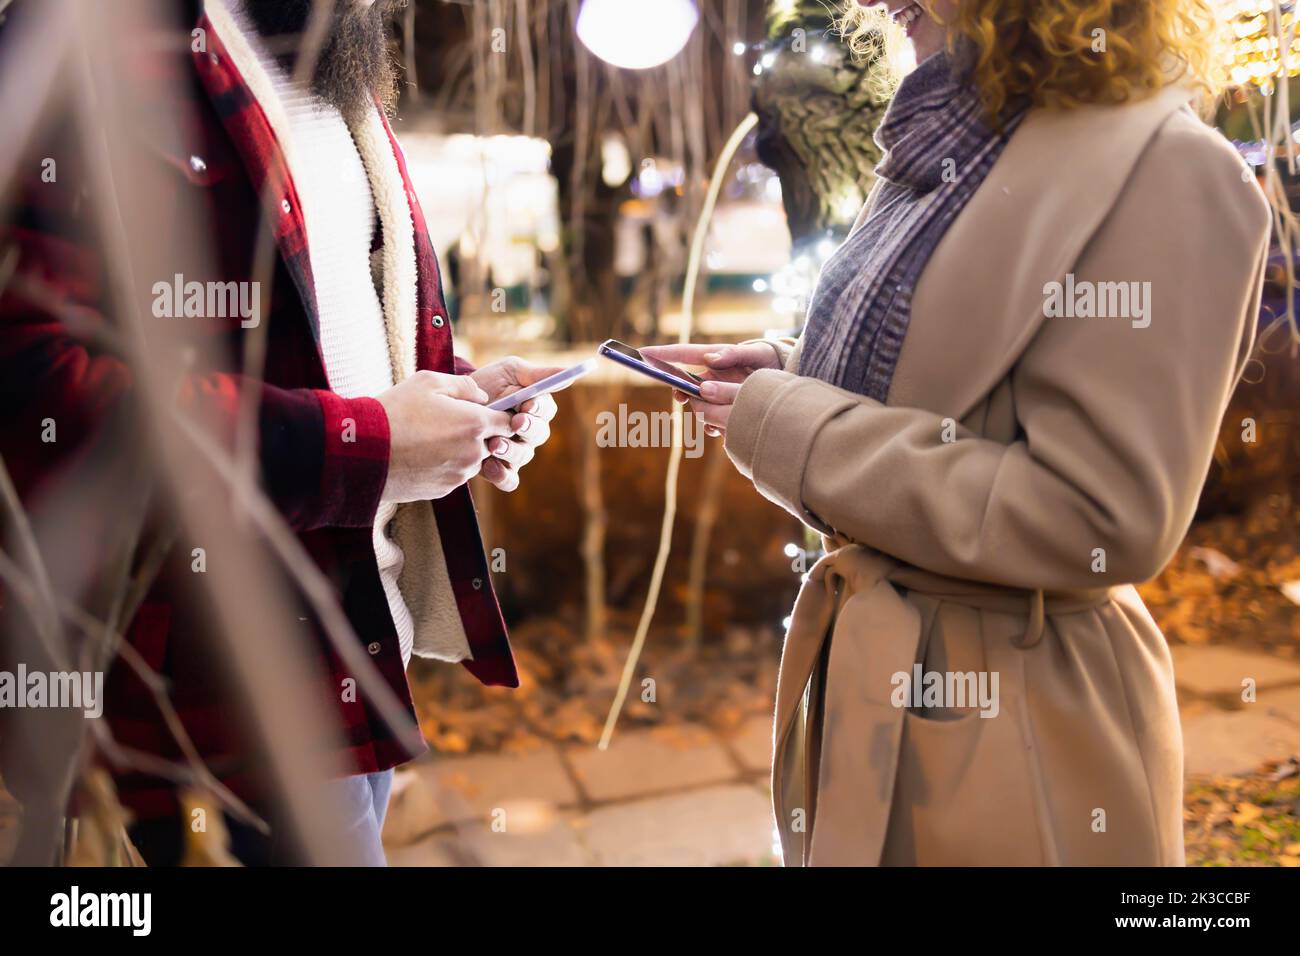 Detail of a couple holding smartphones close to each other and connecting Stock Photo